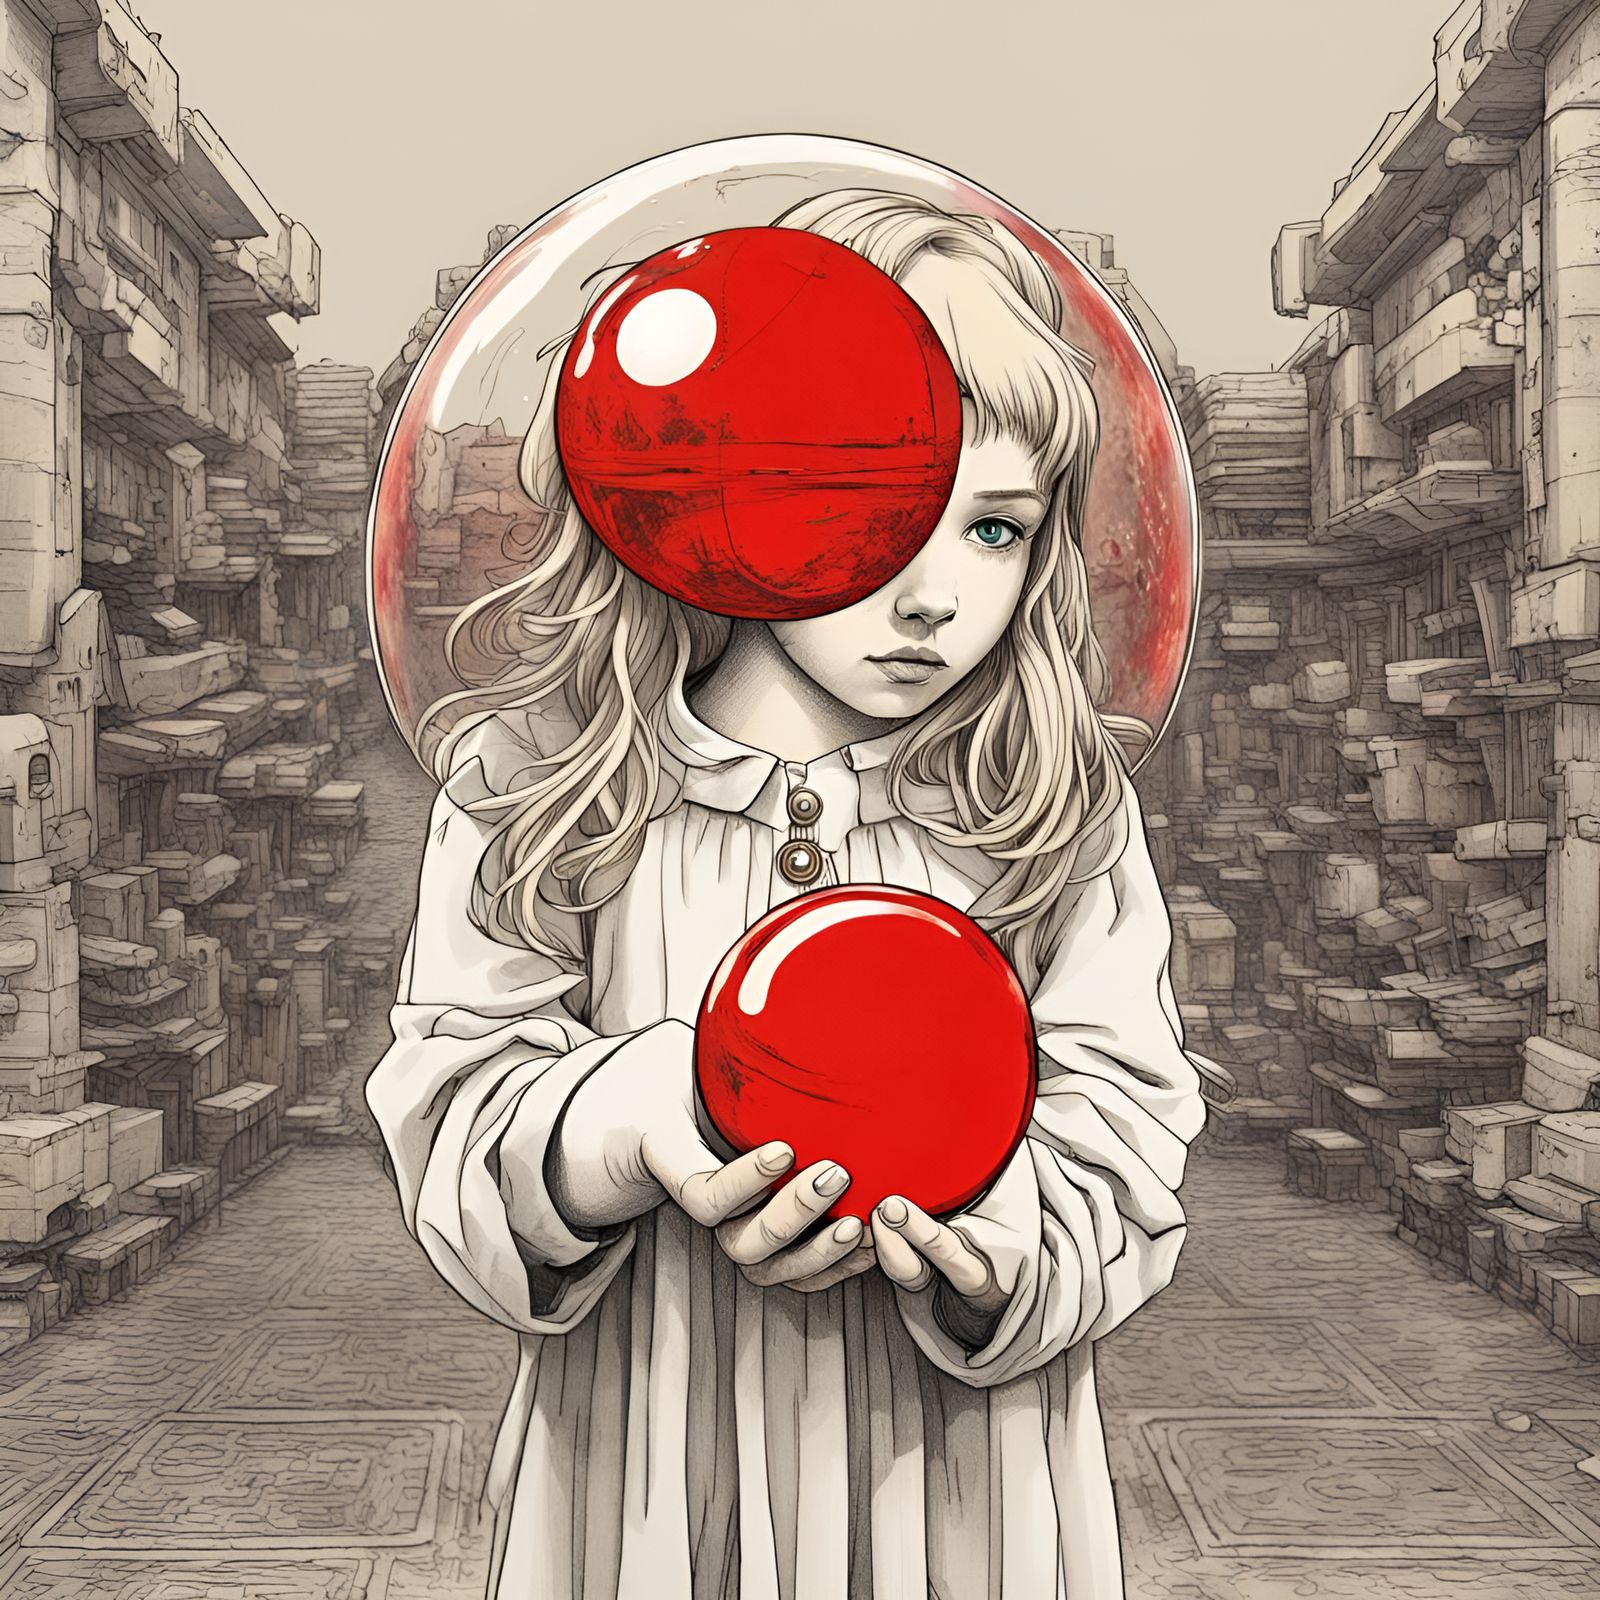 Little blonde girl with red sphere